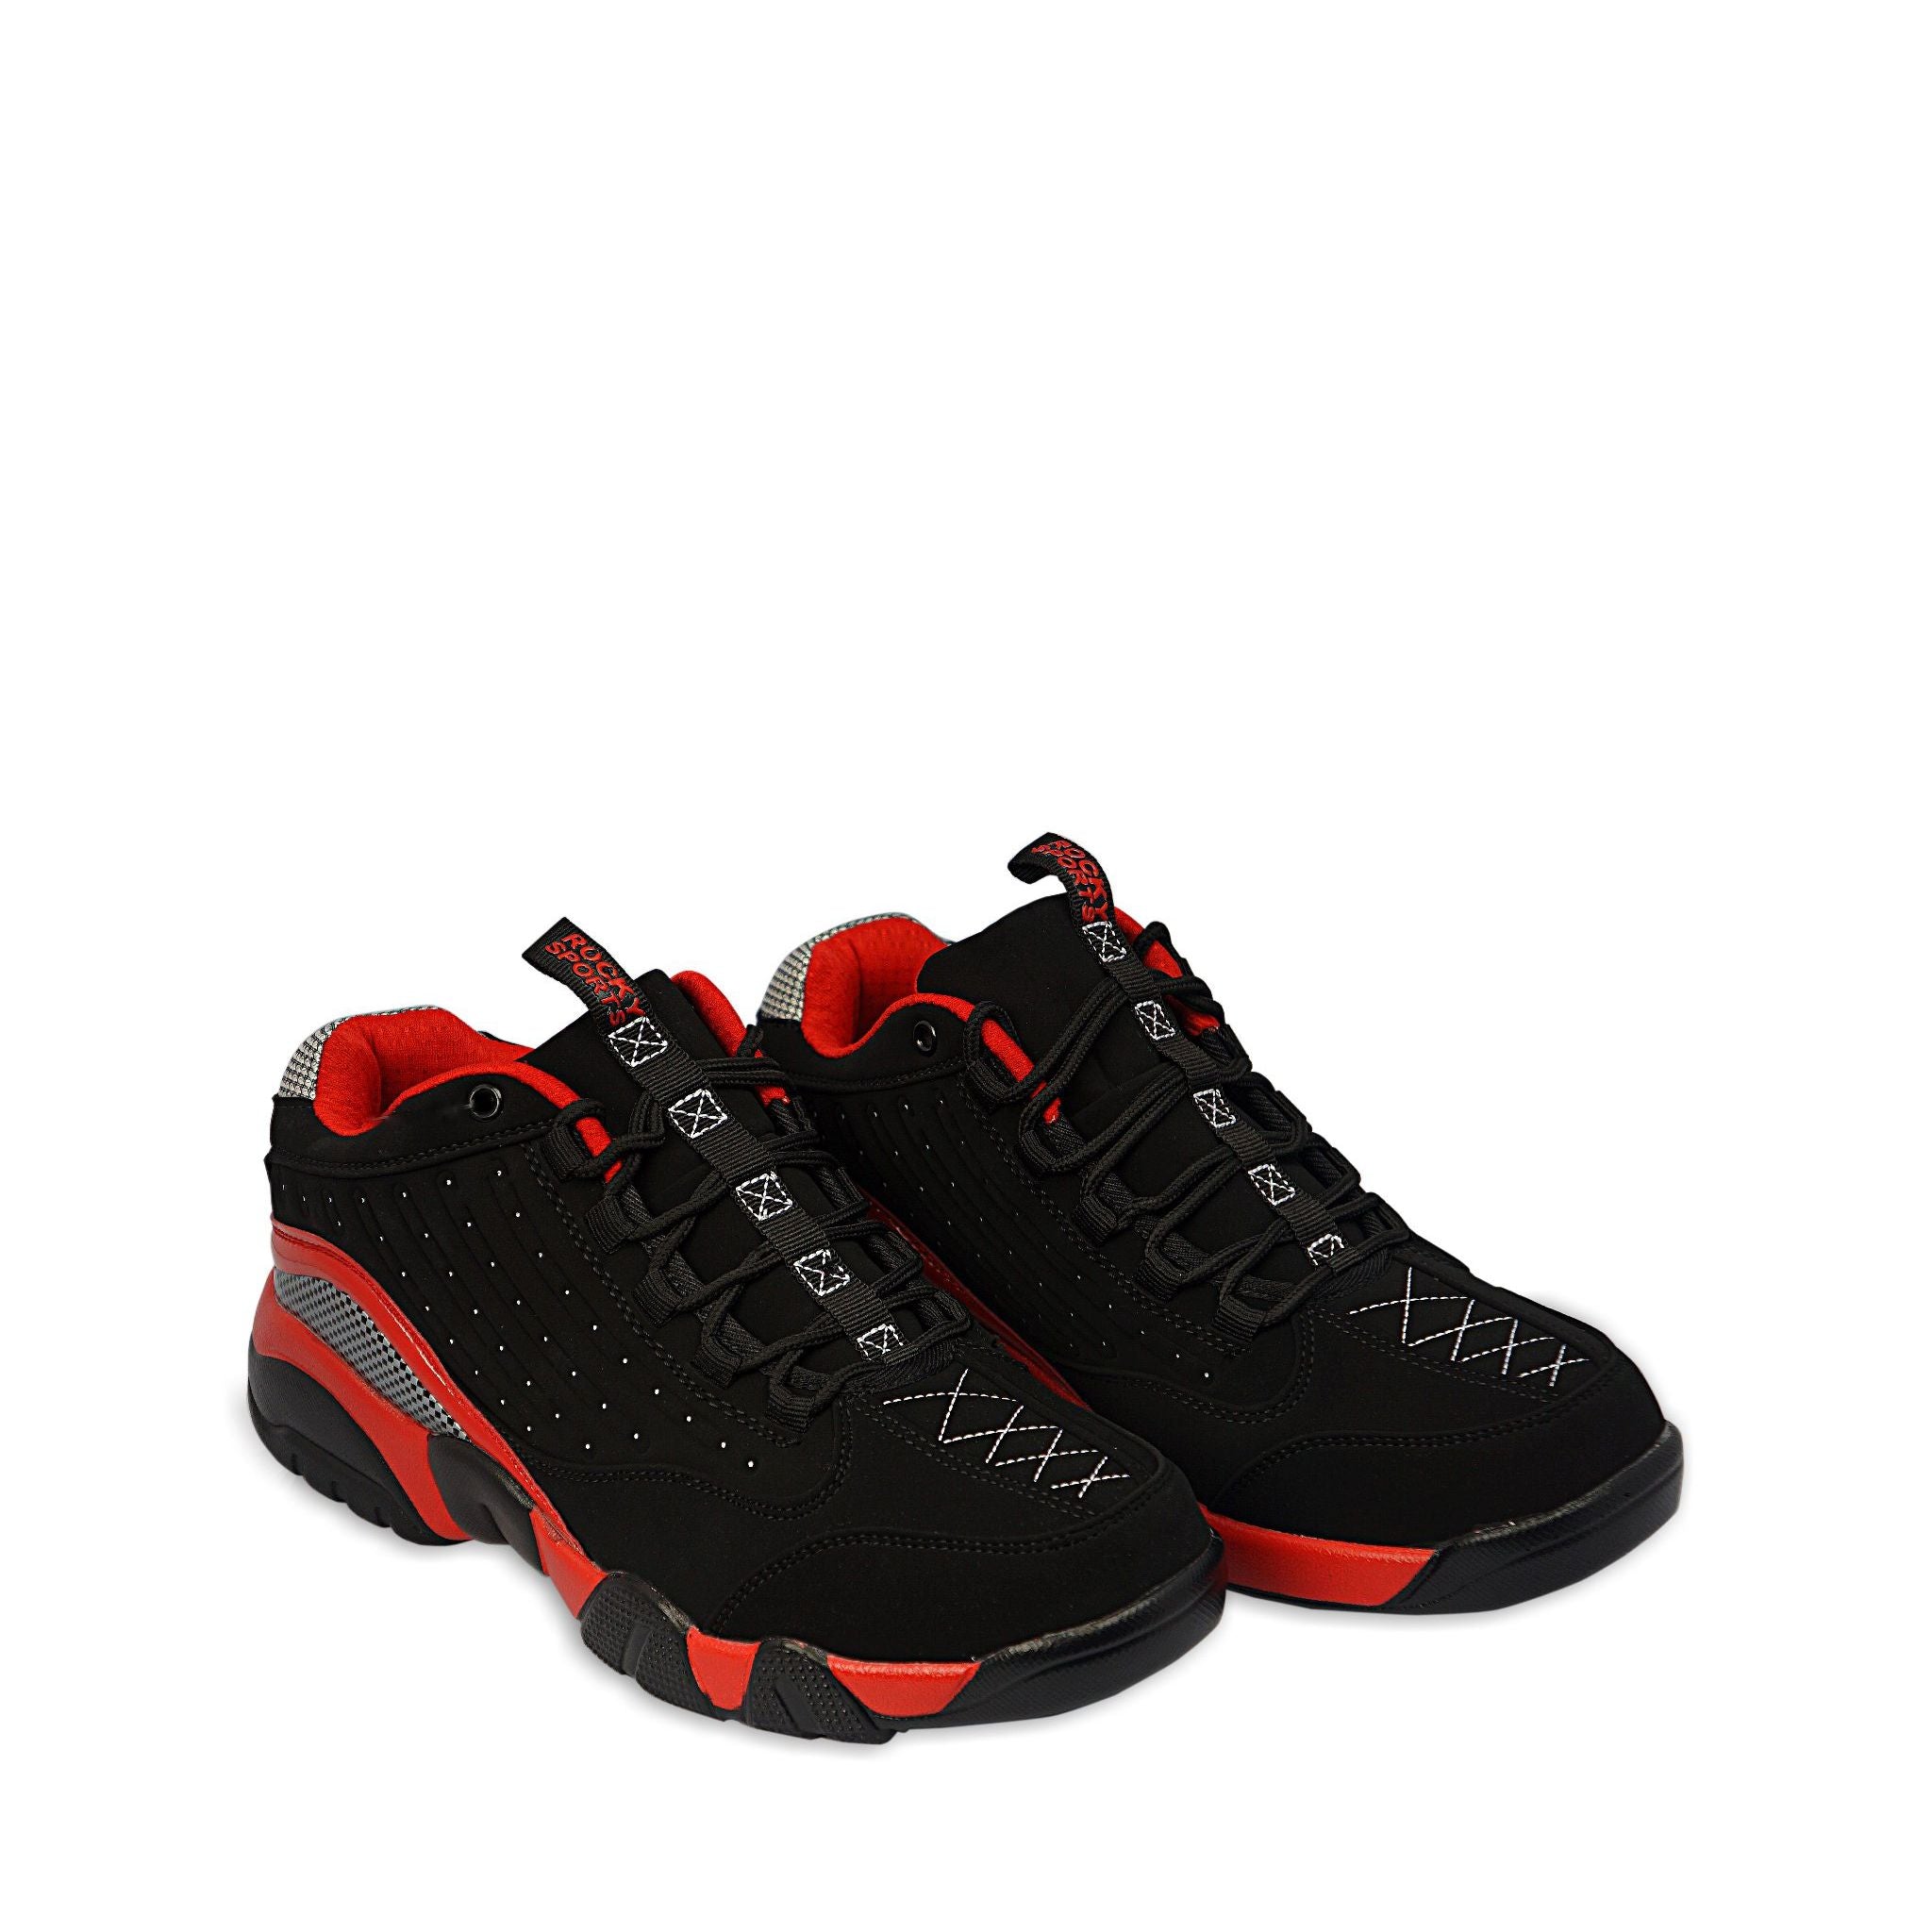 Shop Mens Sports Sneakers online in Dubai and UAE